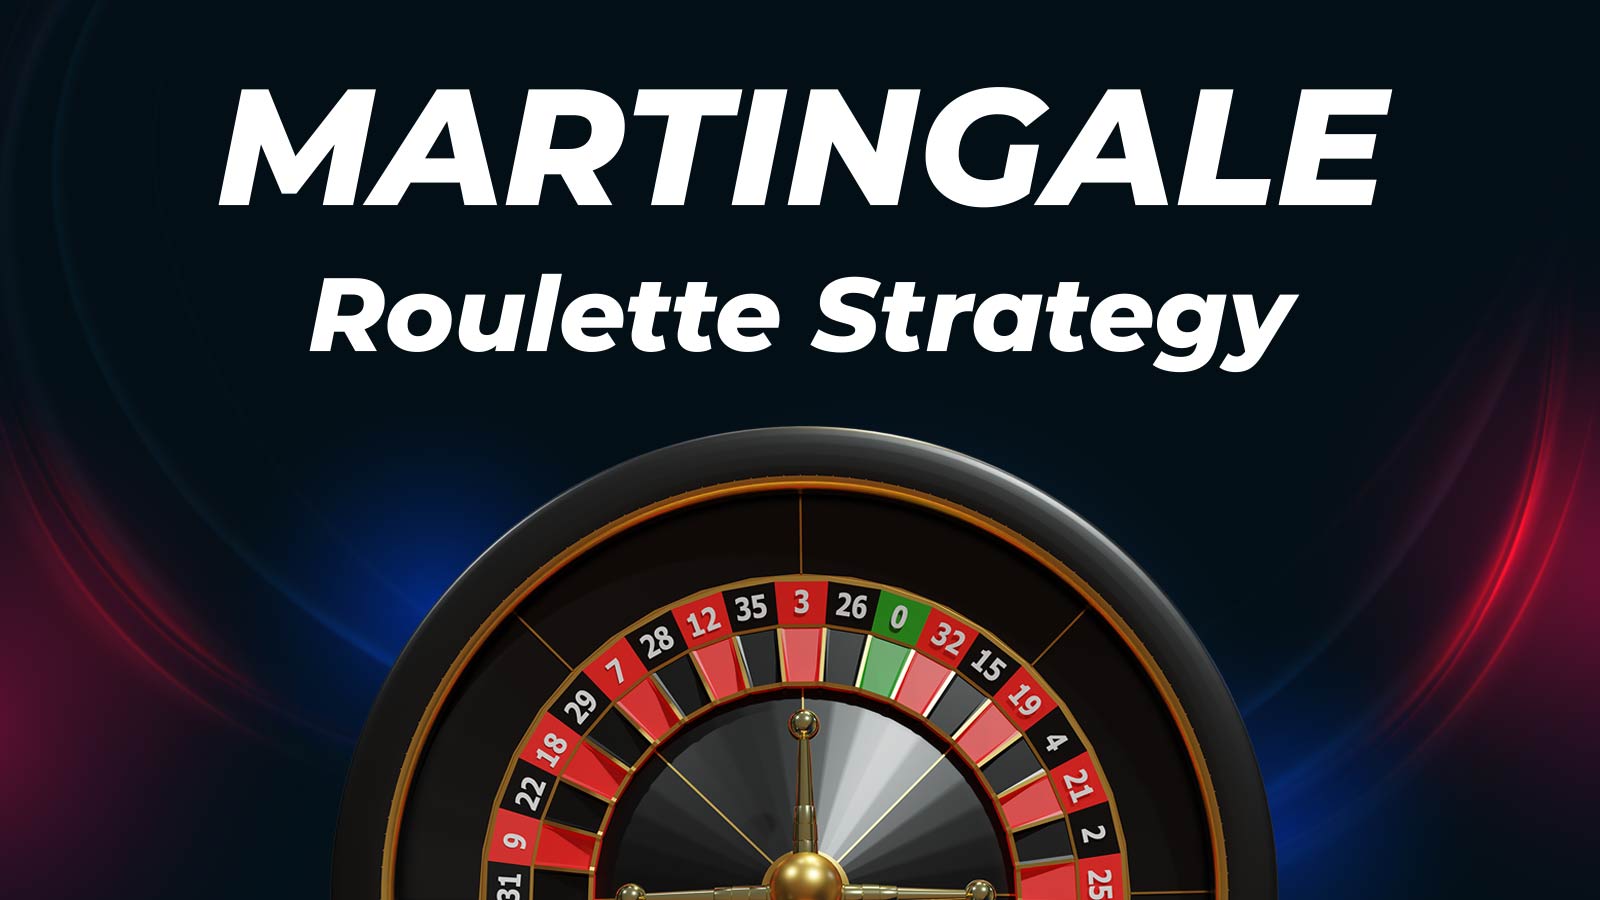 The Martingale Roulette System [Certified Strategy]